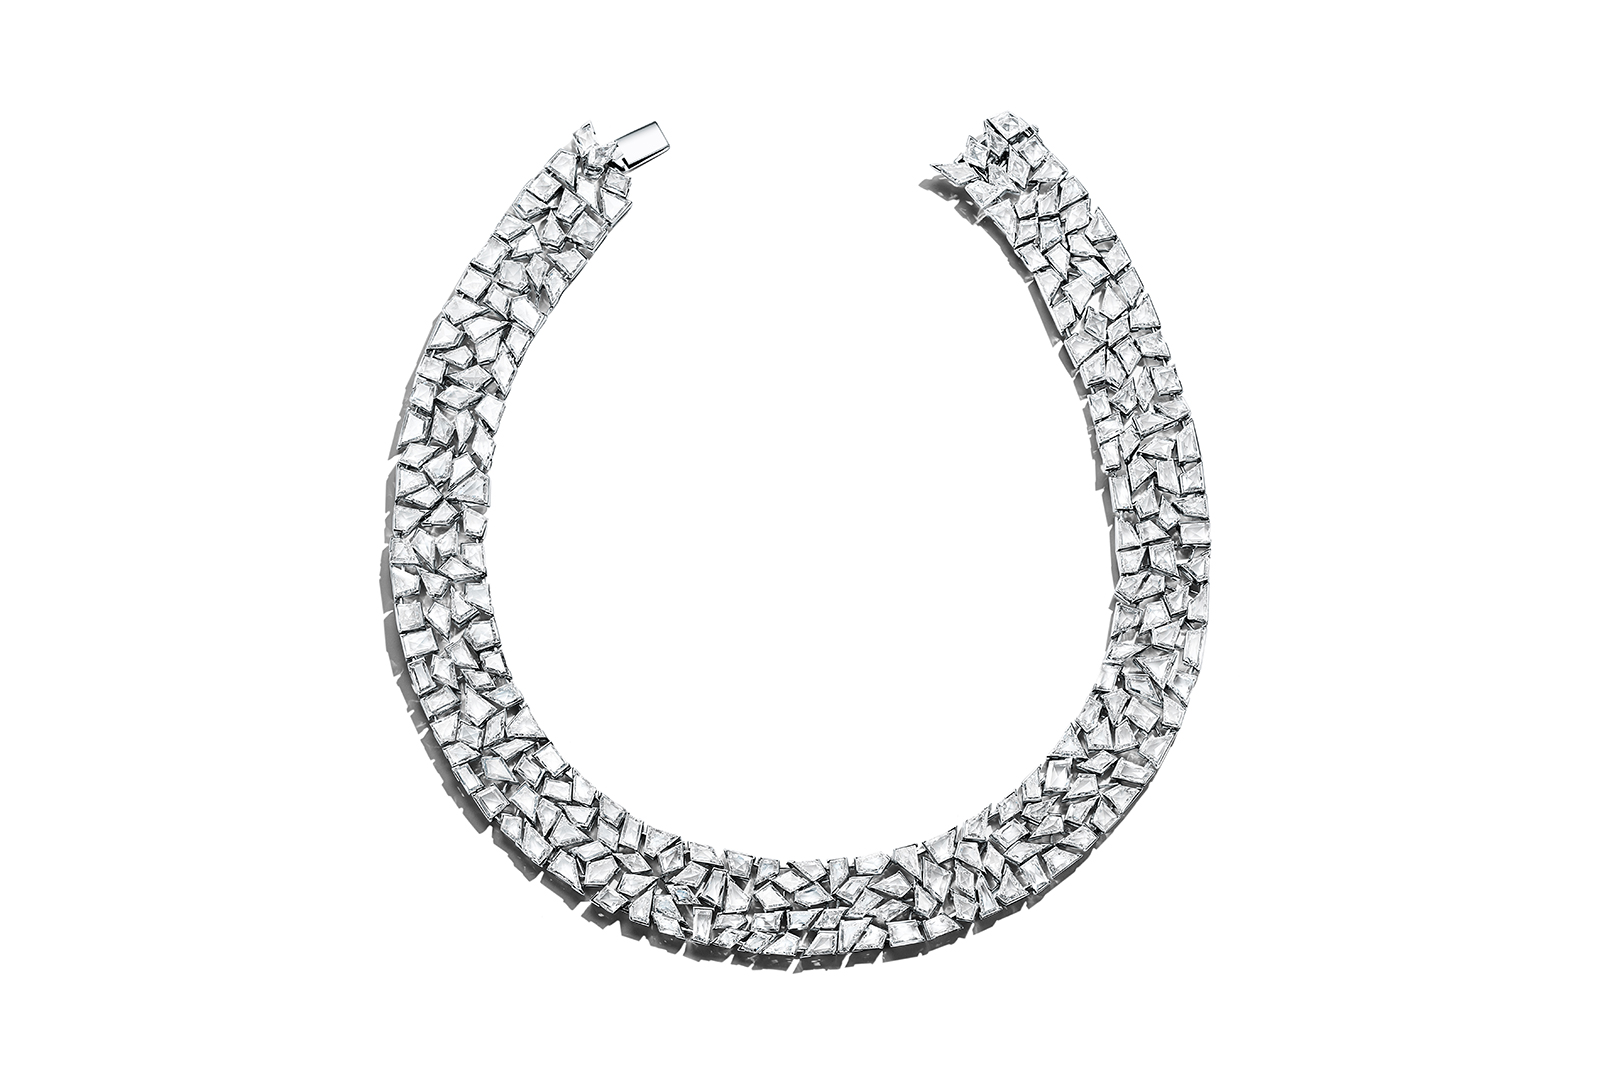 Tiffany & Co. Blue Book 2018 collection necklace in platinum with uniquely cut diamonds, over 92 total carats